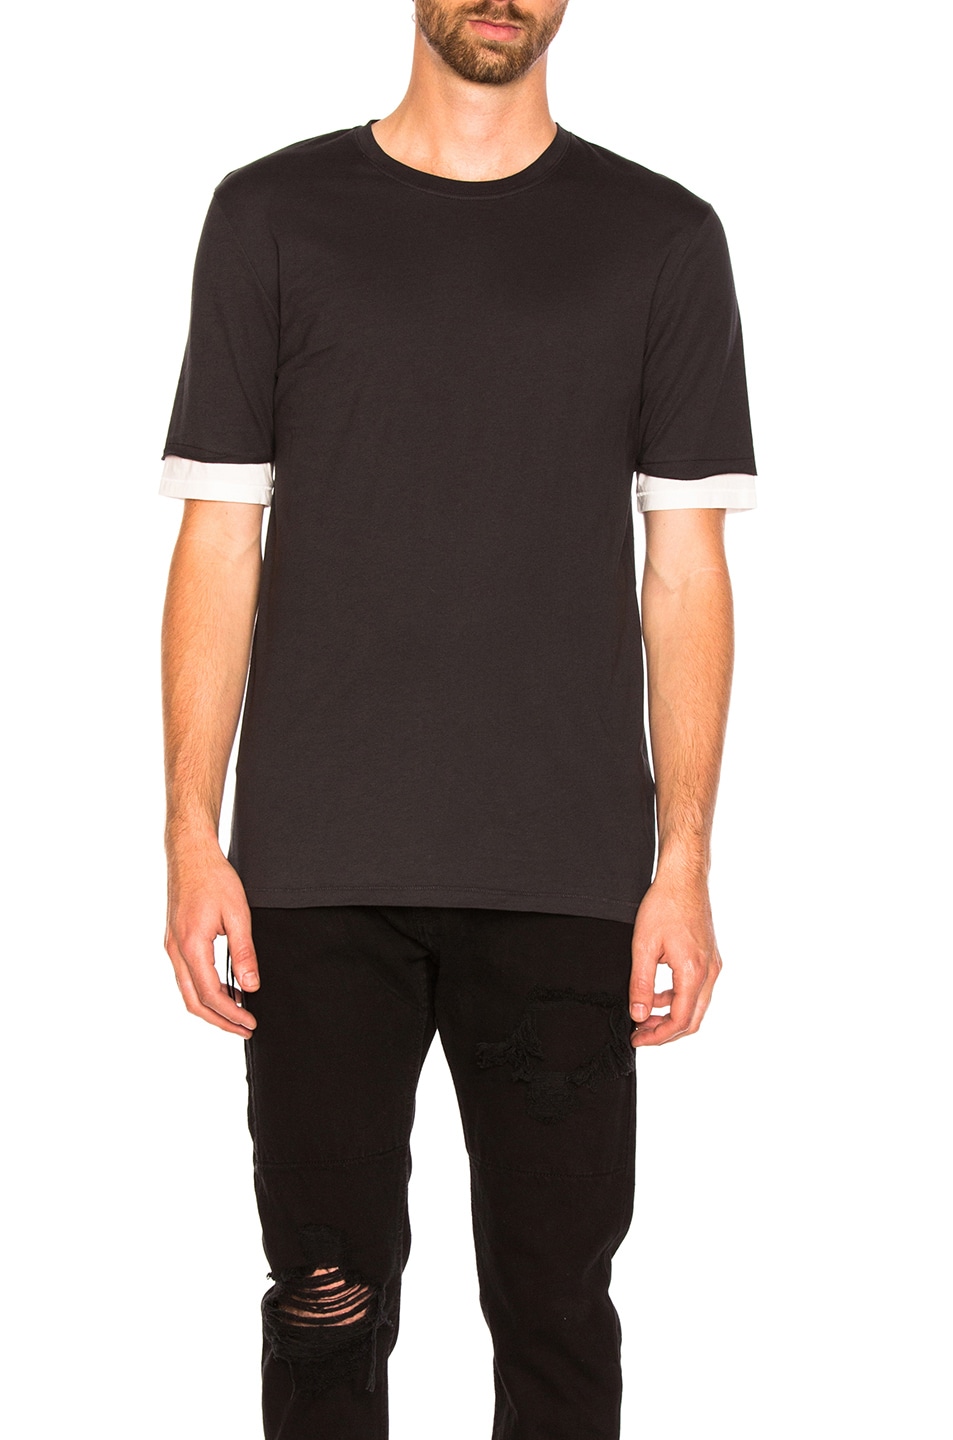 Image 1 of 3.1 phillip lim Double Layer Tee in Soft Black